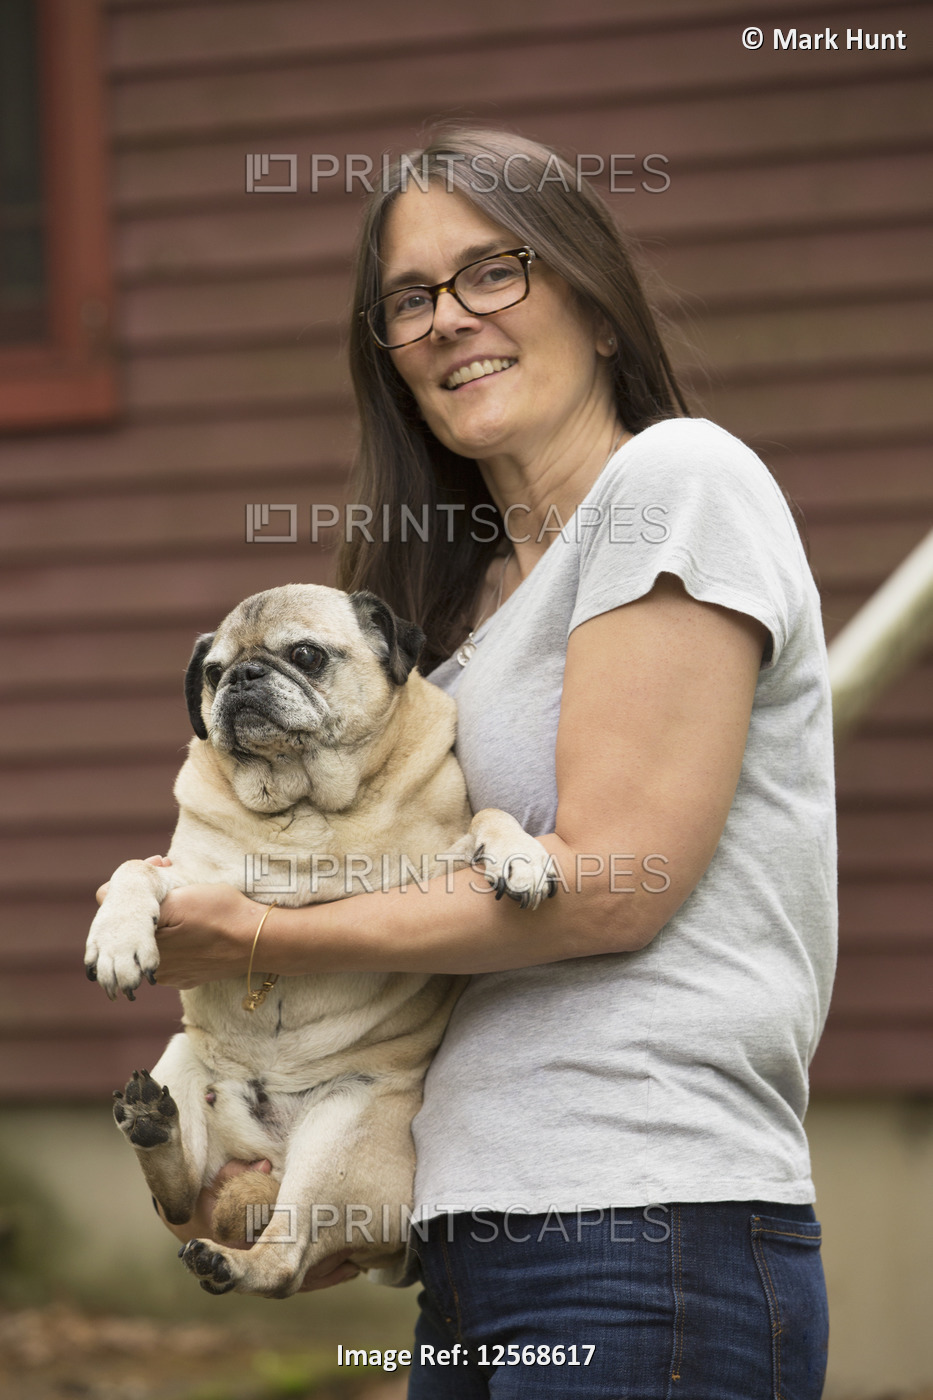 Woman with Multiple Sclerosis holding her dog